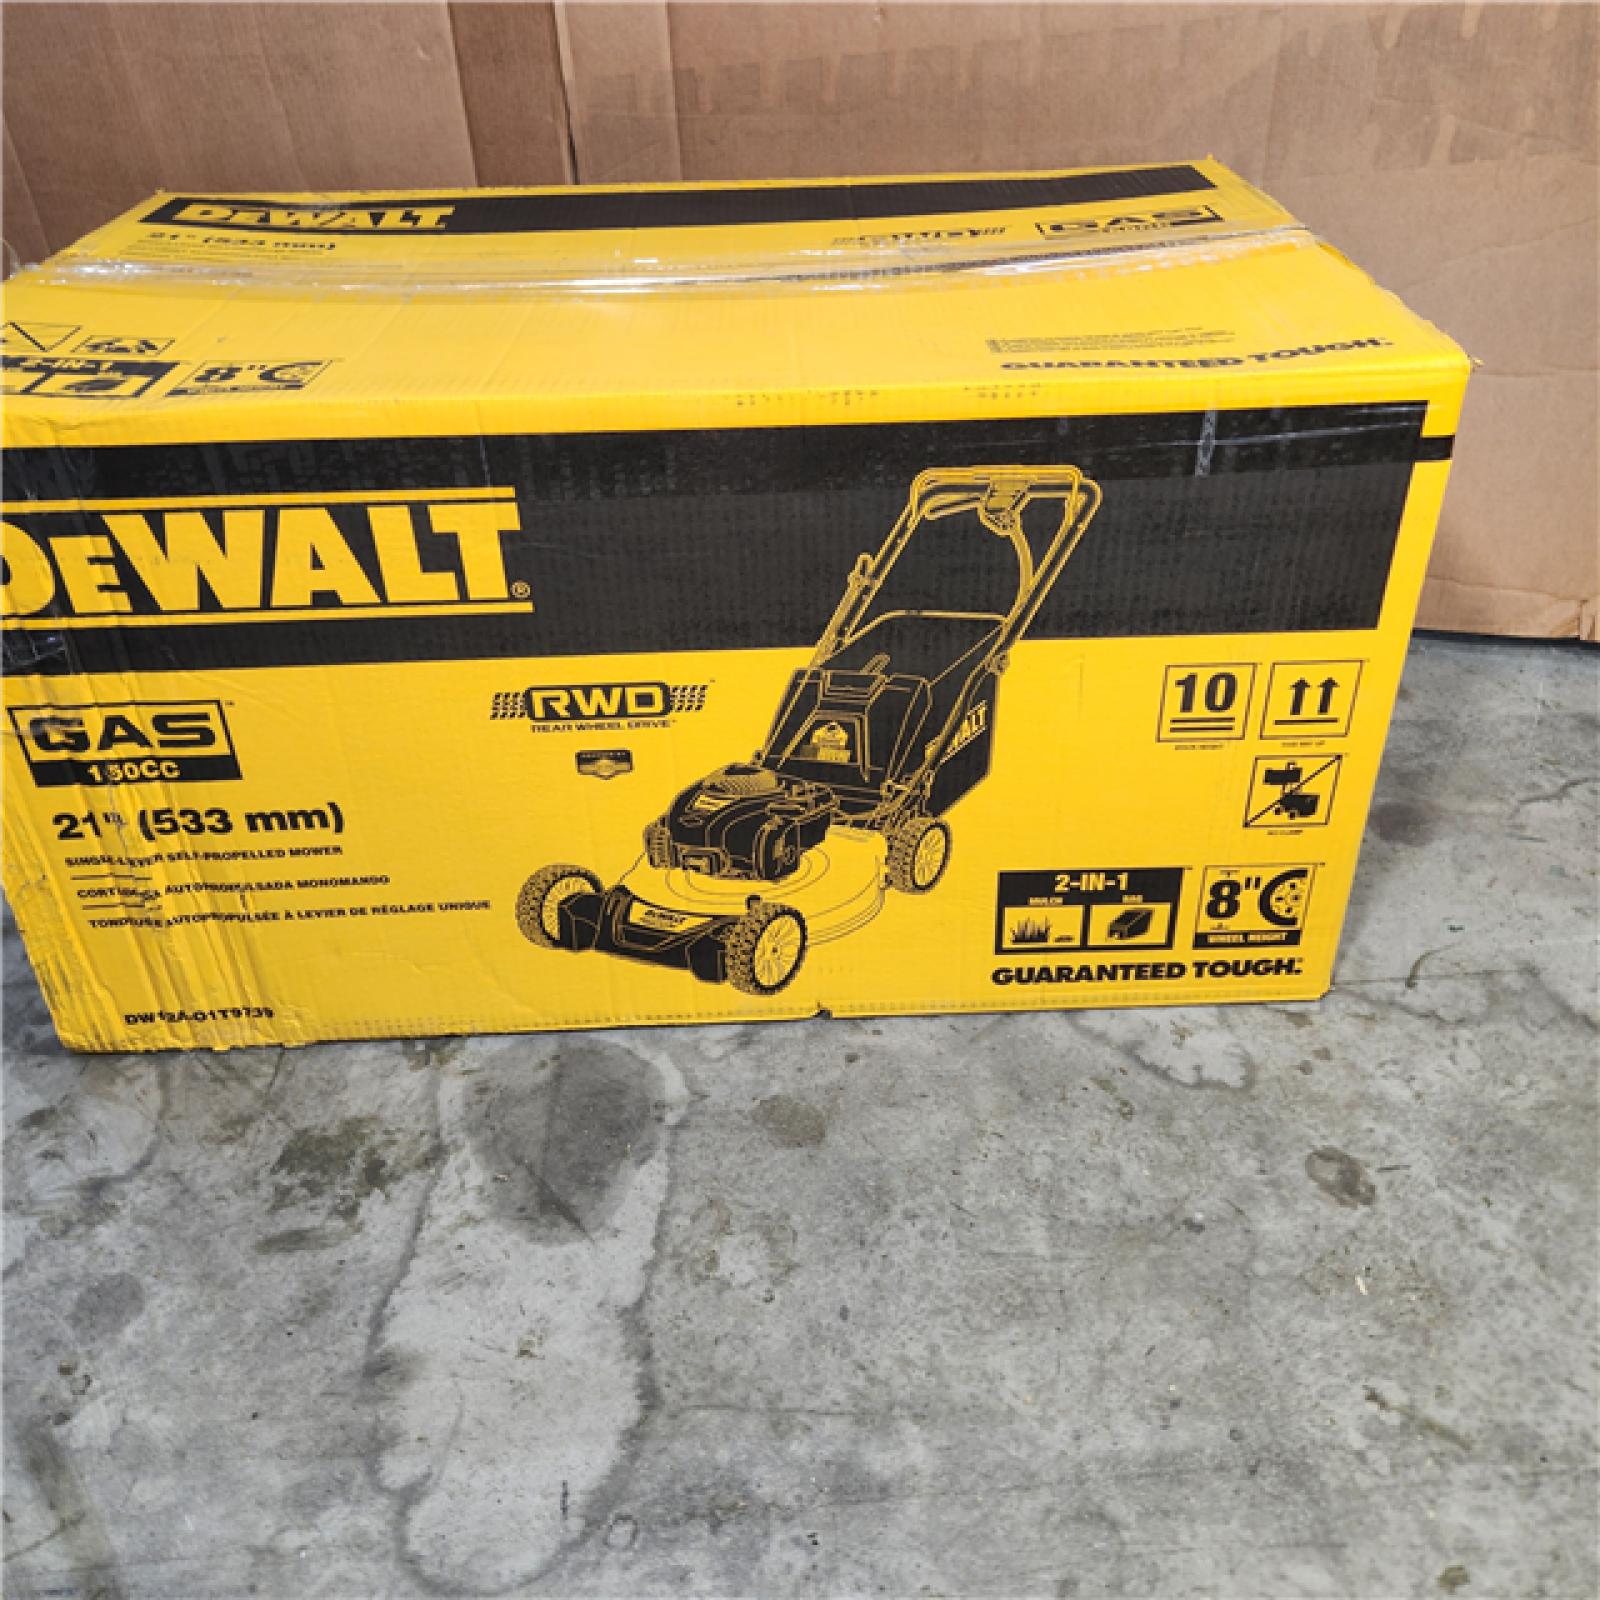 Houston Location - AS-IS Dewalt 150cc 21 Single Lever Self-Propelled Lawn Mower - Appears IN NEW Condition